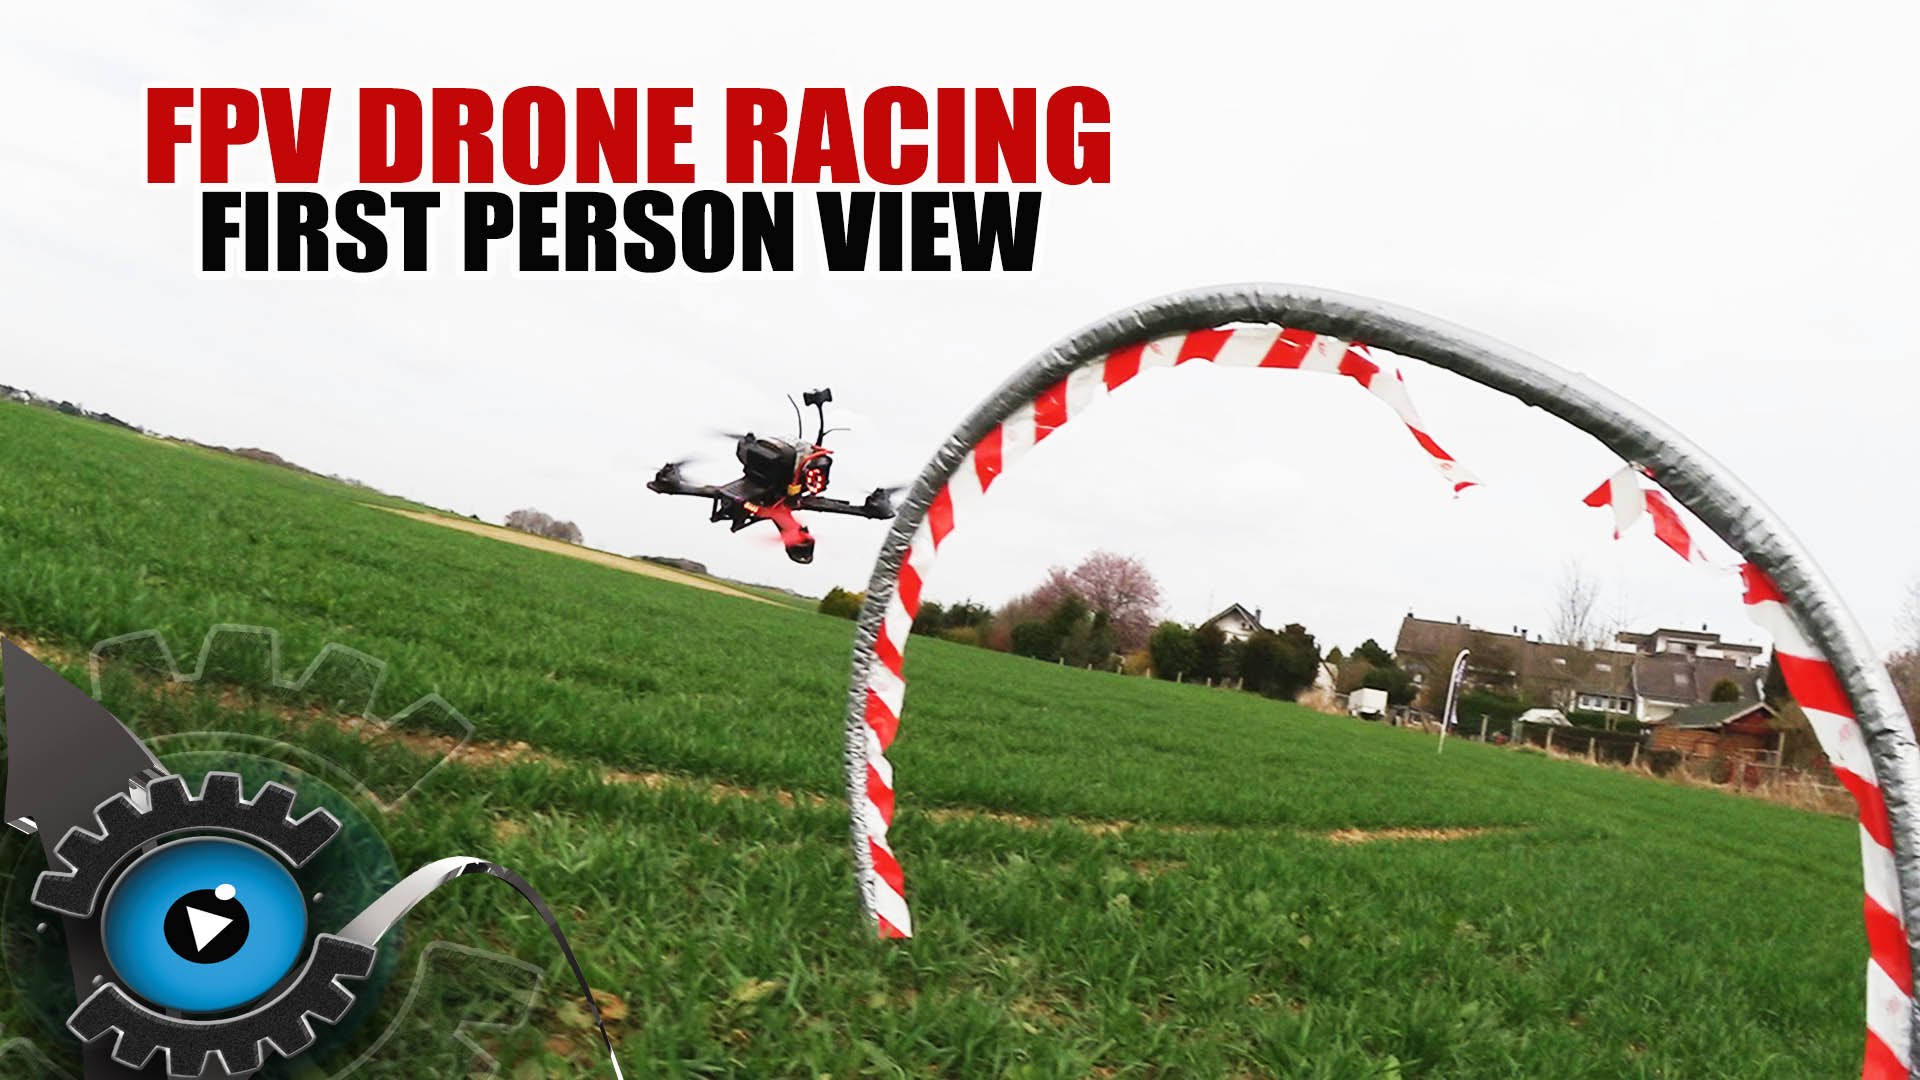 FPV Drone Racing with Germany’s most successful team Quadrocopter